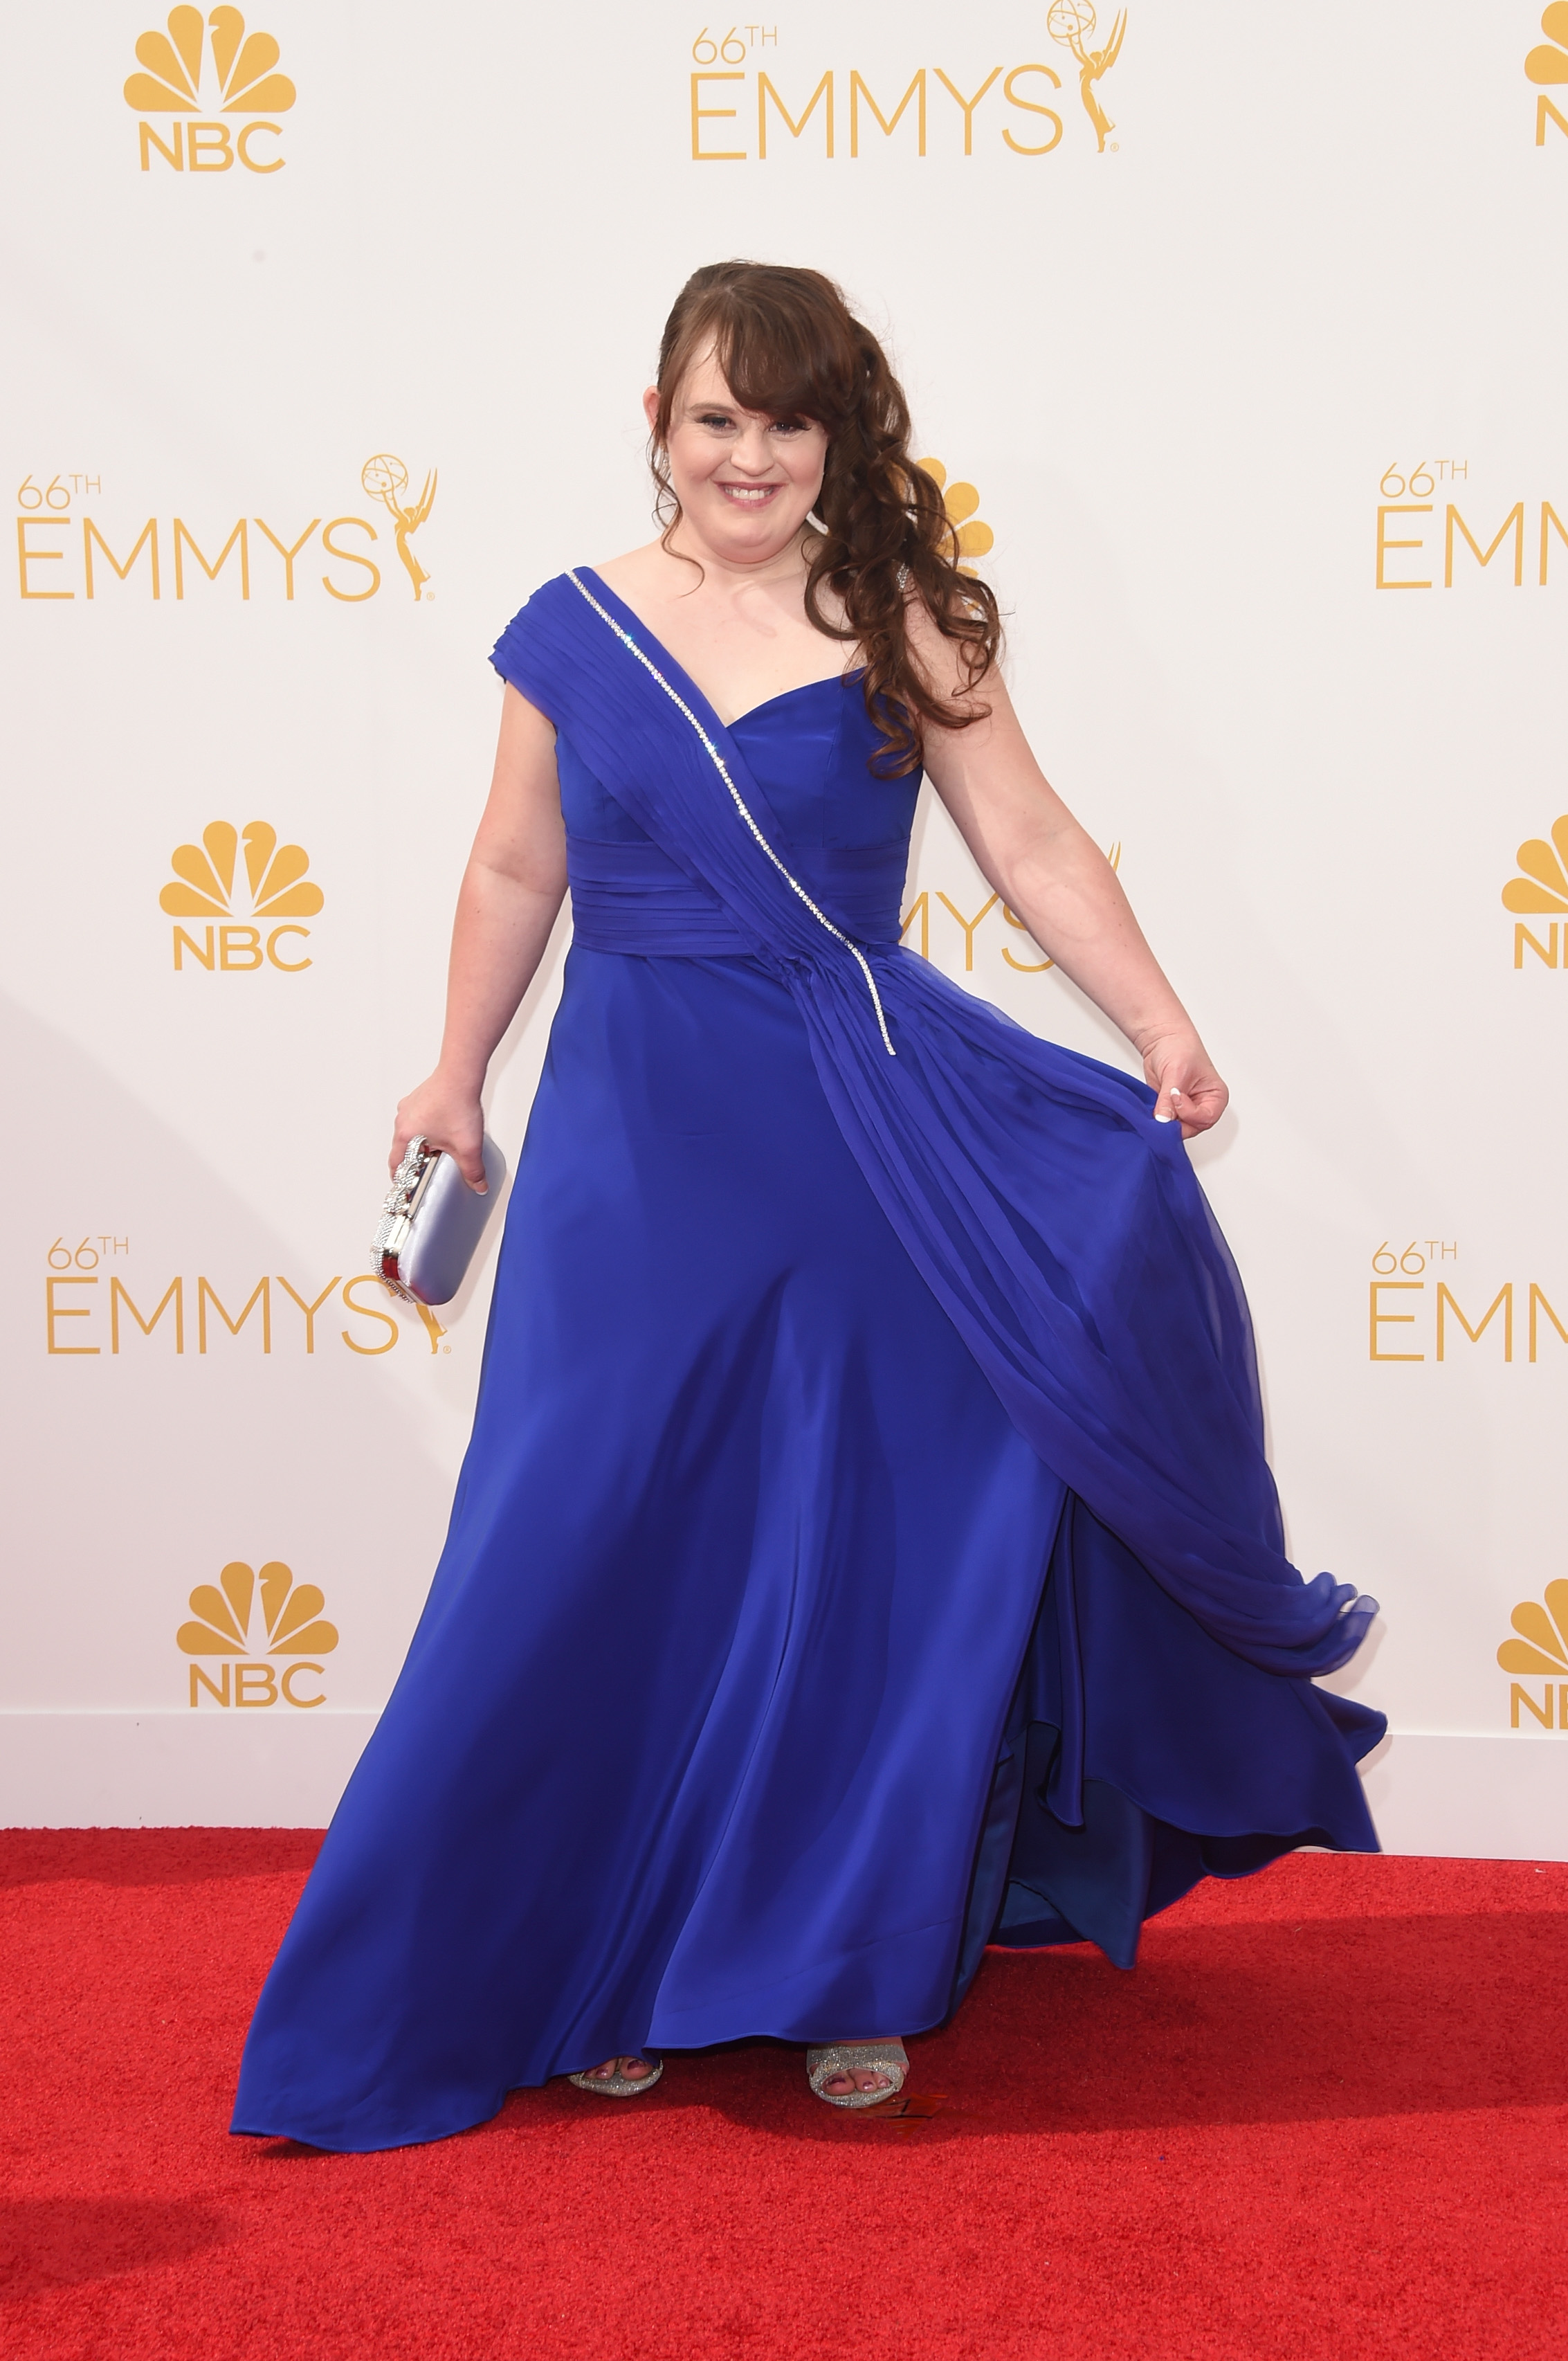 LOS ANGELES, CA - AUGUST 25: Actress Jamie Brewer attends the 66th Annual Primetime Emmy Awards held at Nokia Theatre L.A. Live on August 25, 2014 in Los Angeles, California.